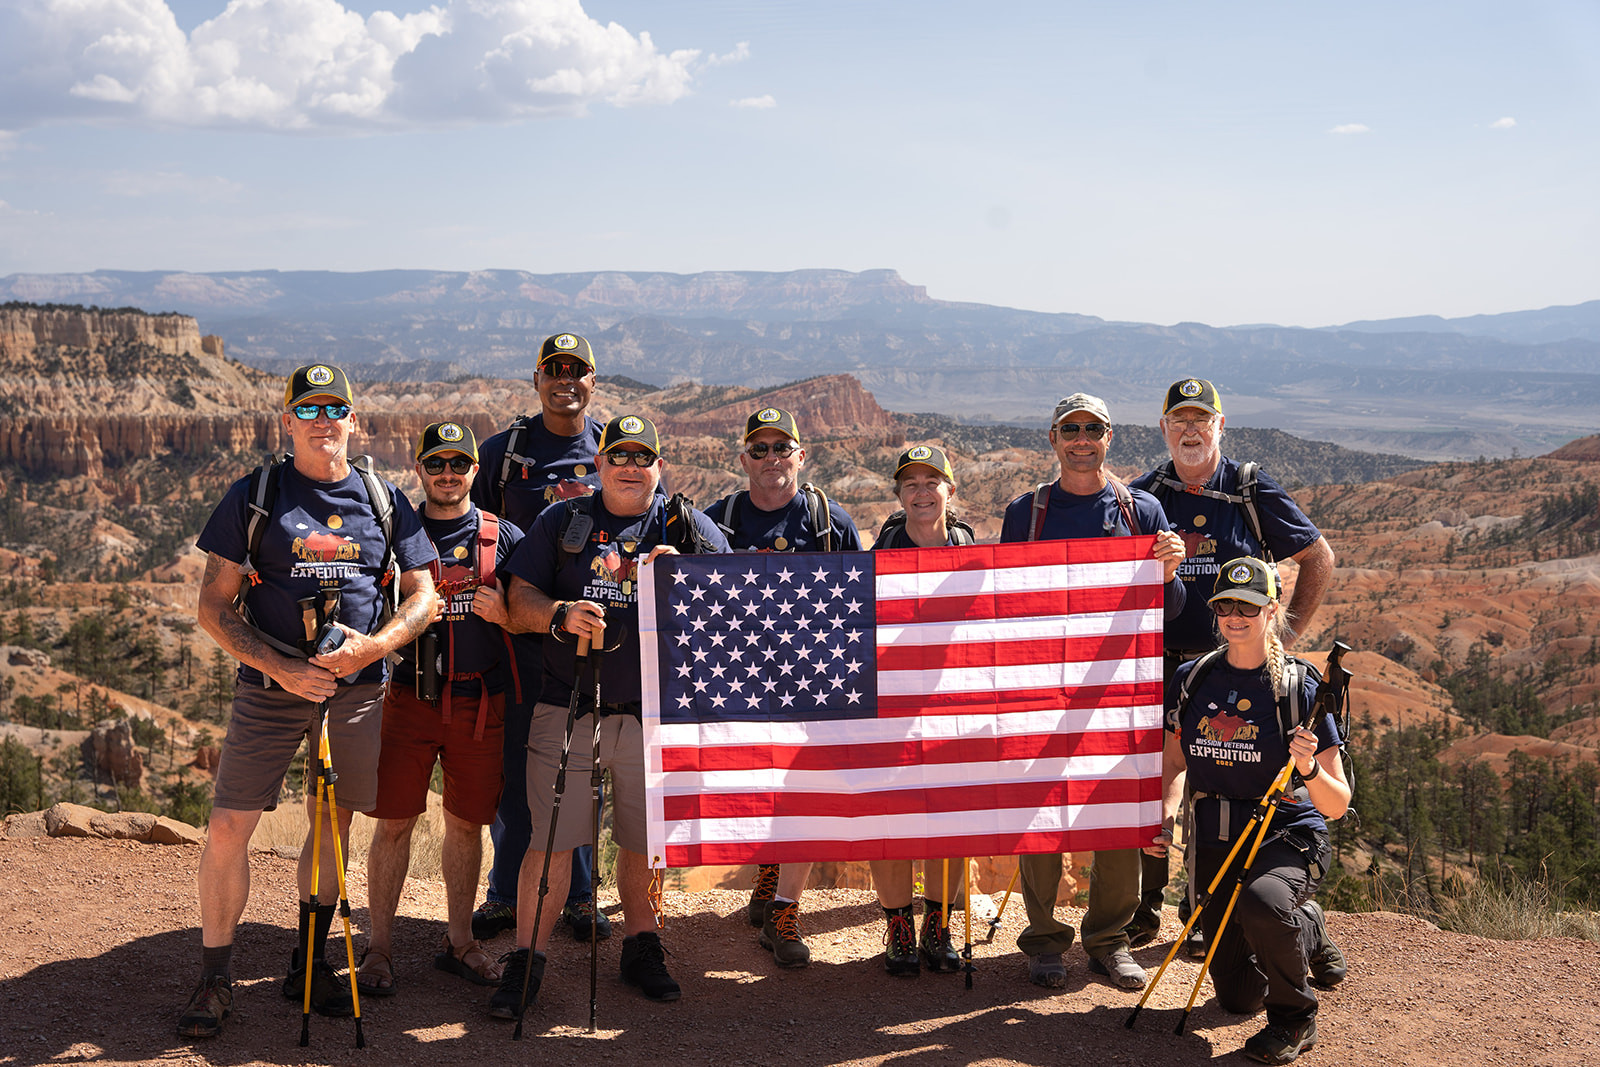 Adventure, Gourmet Food, & Friendship: Veteran In Trucking Takes Veterans Into the Zion Wilderness for the Expedition of A Lifetime